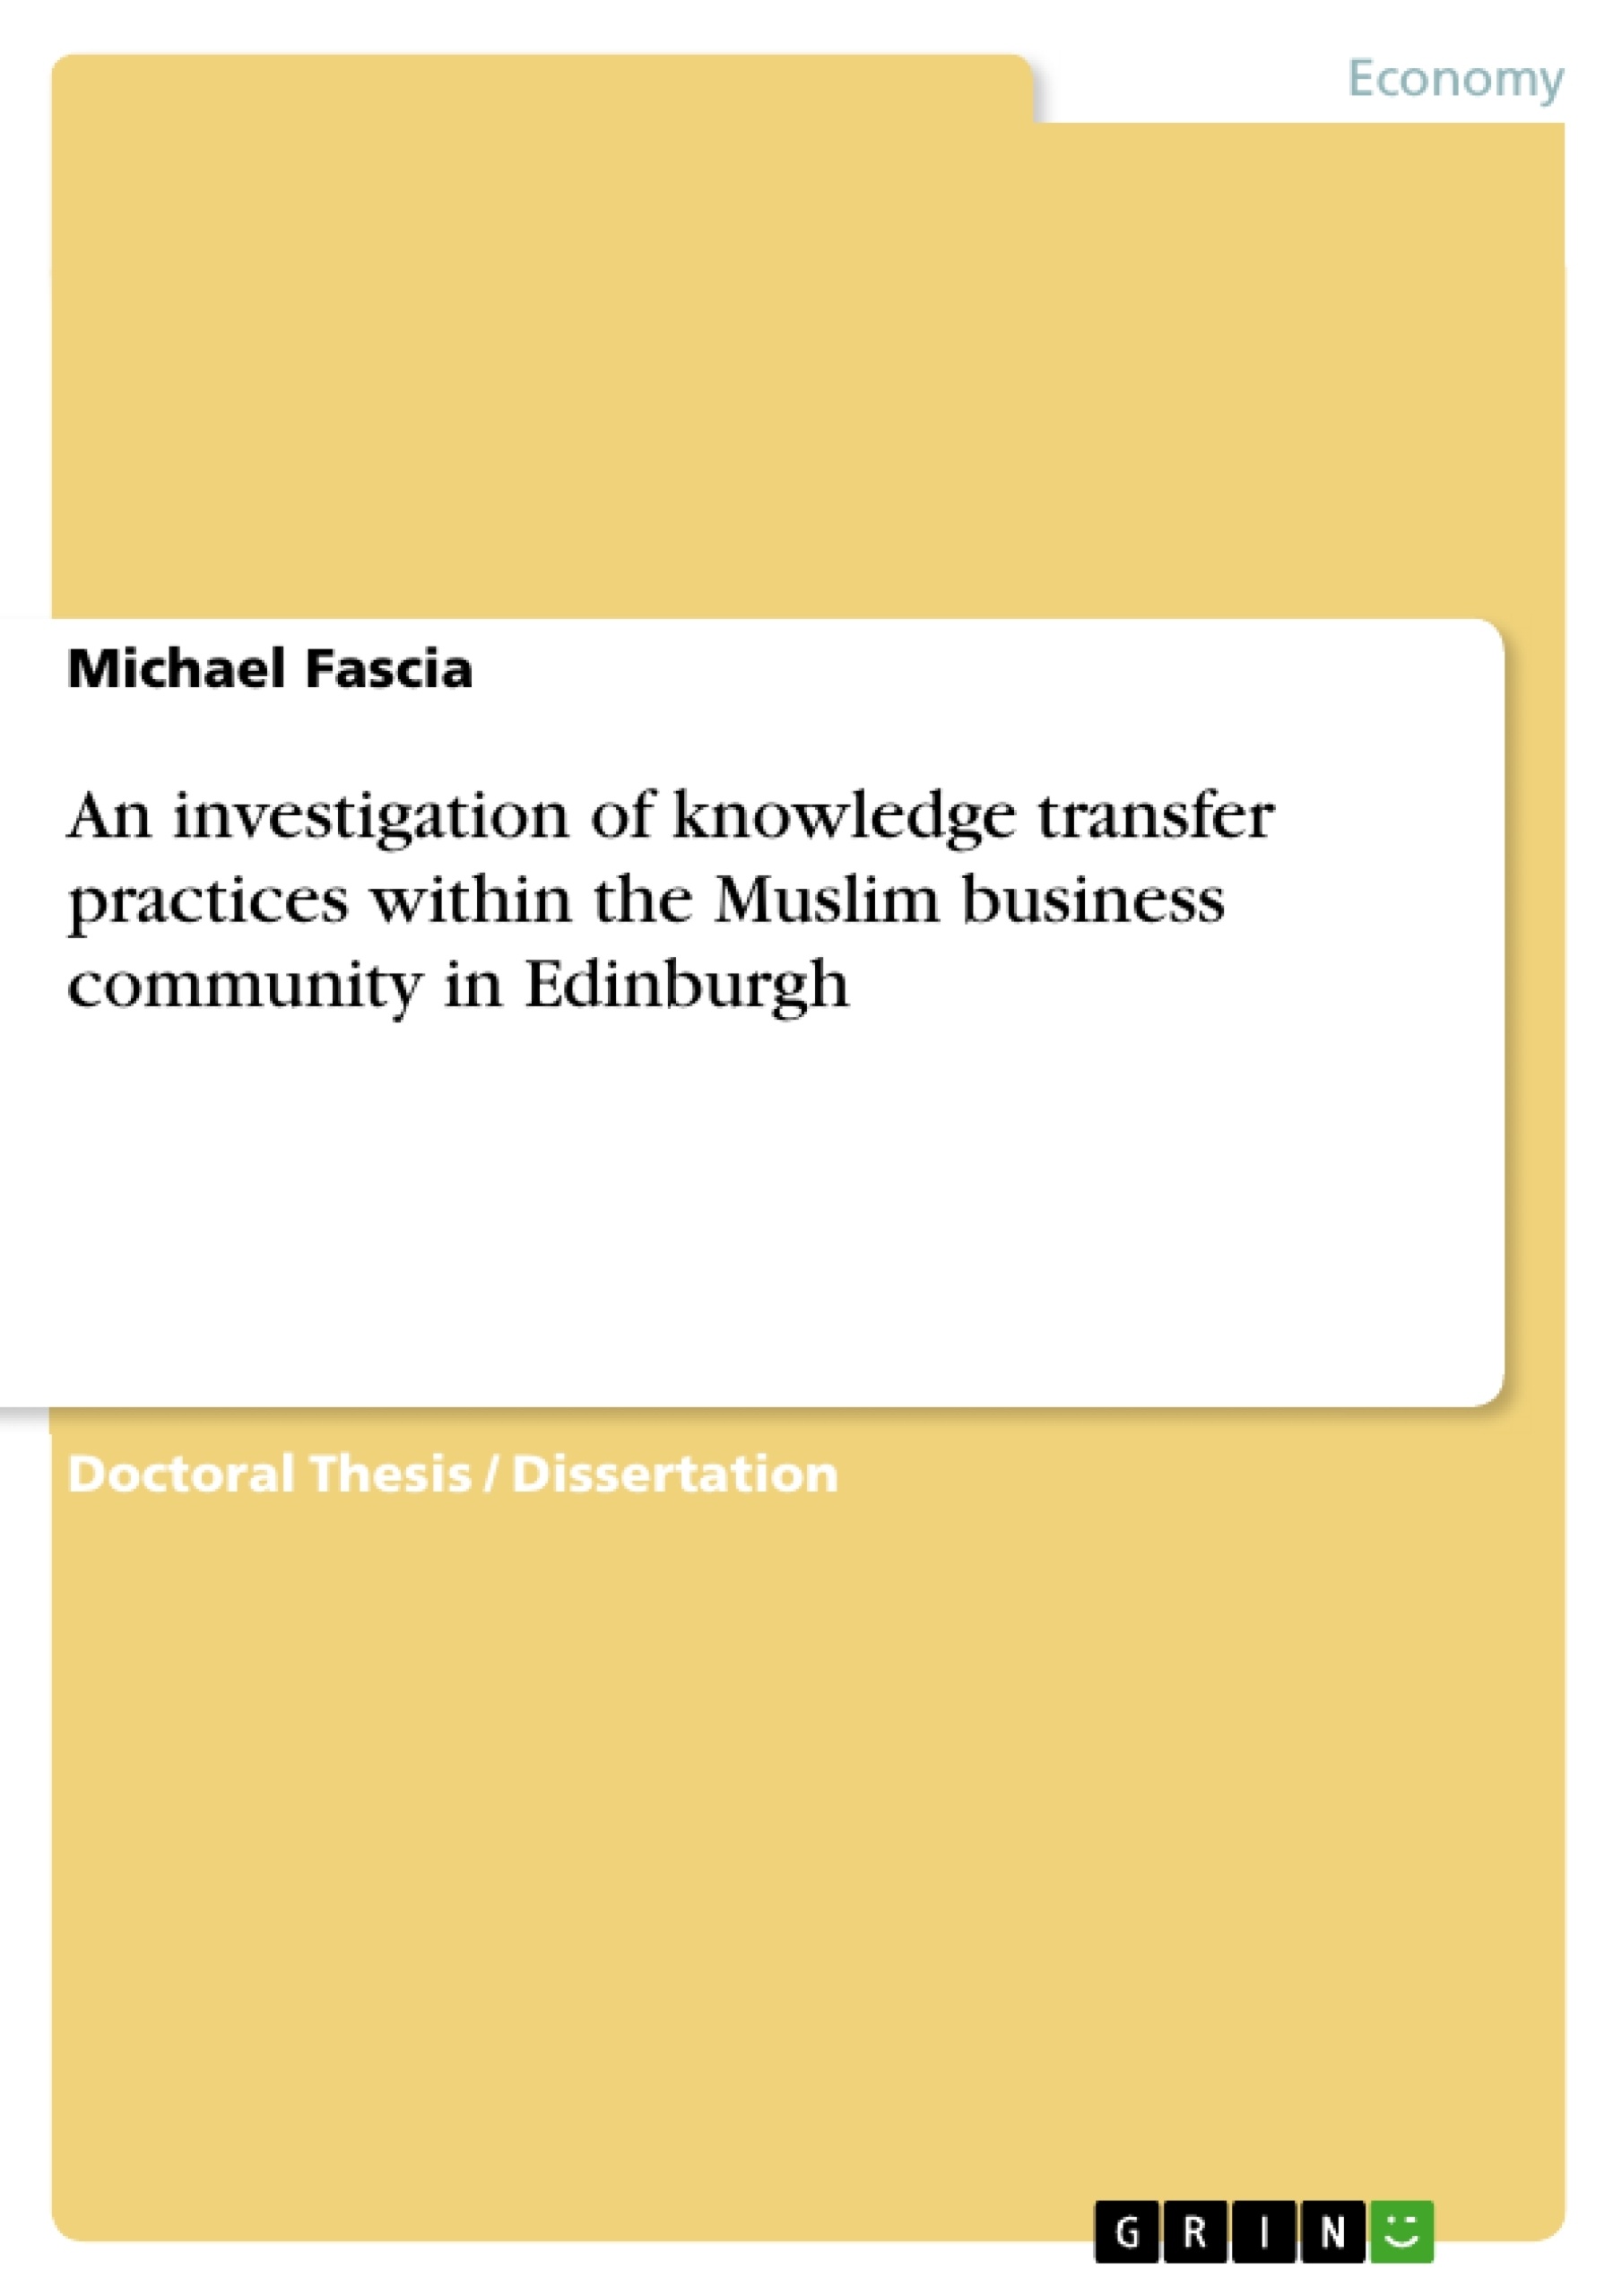 Title: An investigation of knowledge transfer practices within the Muslim business community in Edinburgh